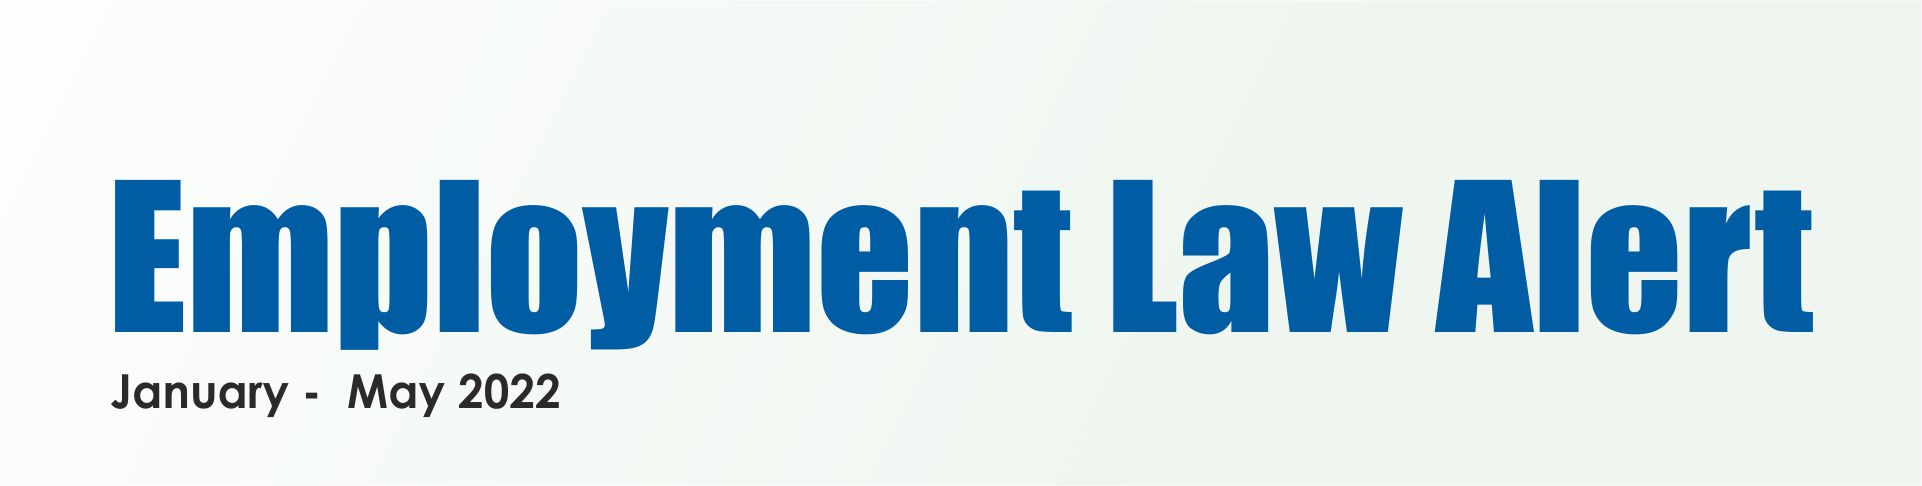 Employment Law Alert - January - May 2022